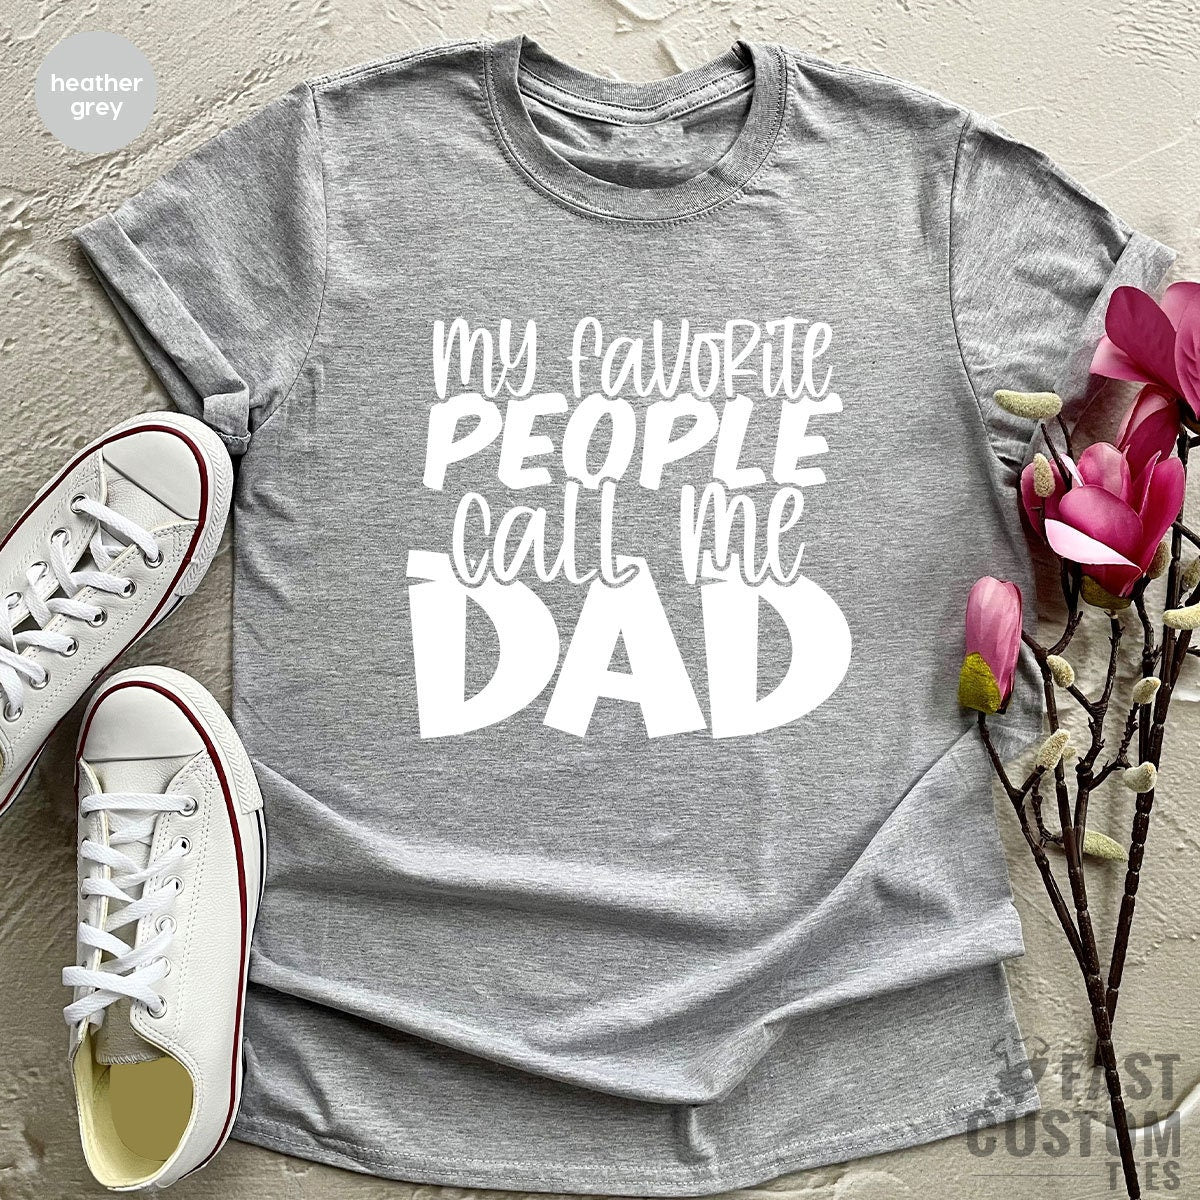 Favorite Dad Shirt, Fathers Day Gift, Fathers Day Shirt, Dad Gifts, Gifts For Dad, Dad Birthday Gift, Dad To Be Shirt, Dad Shirt - Fastdeliverytees.com